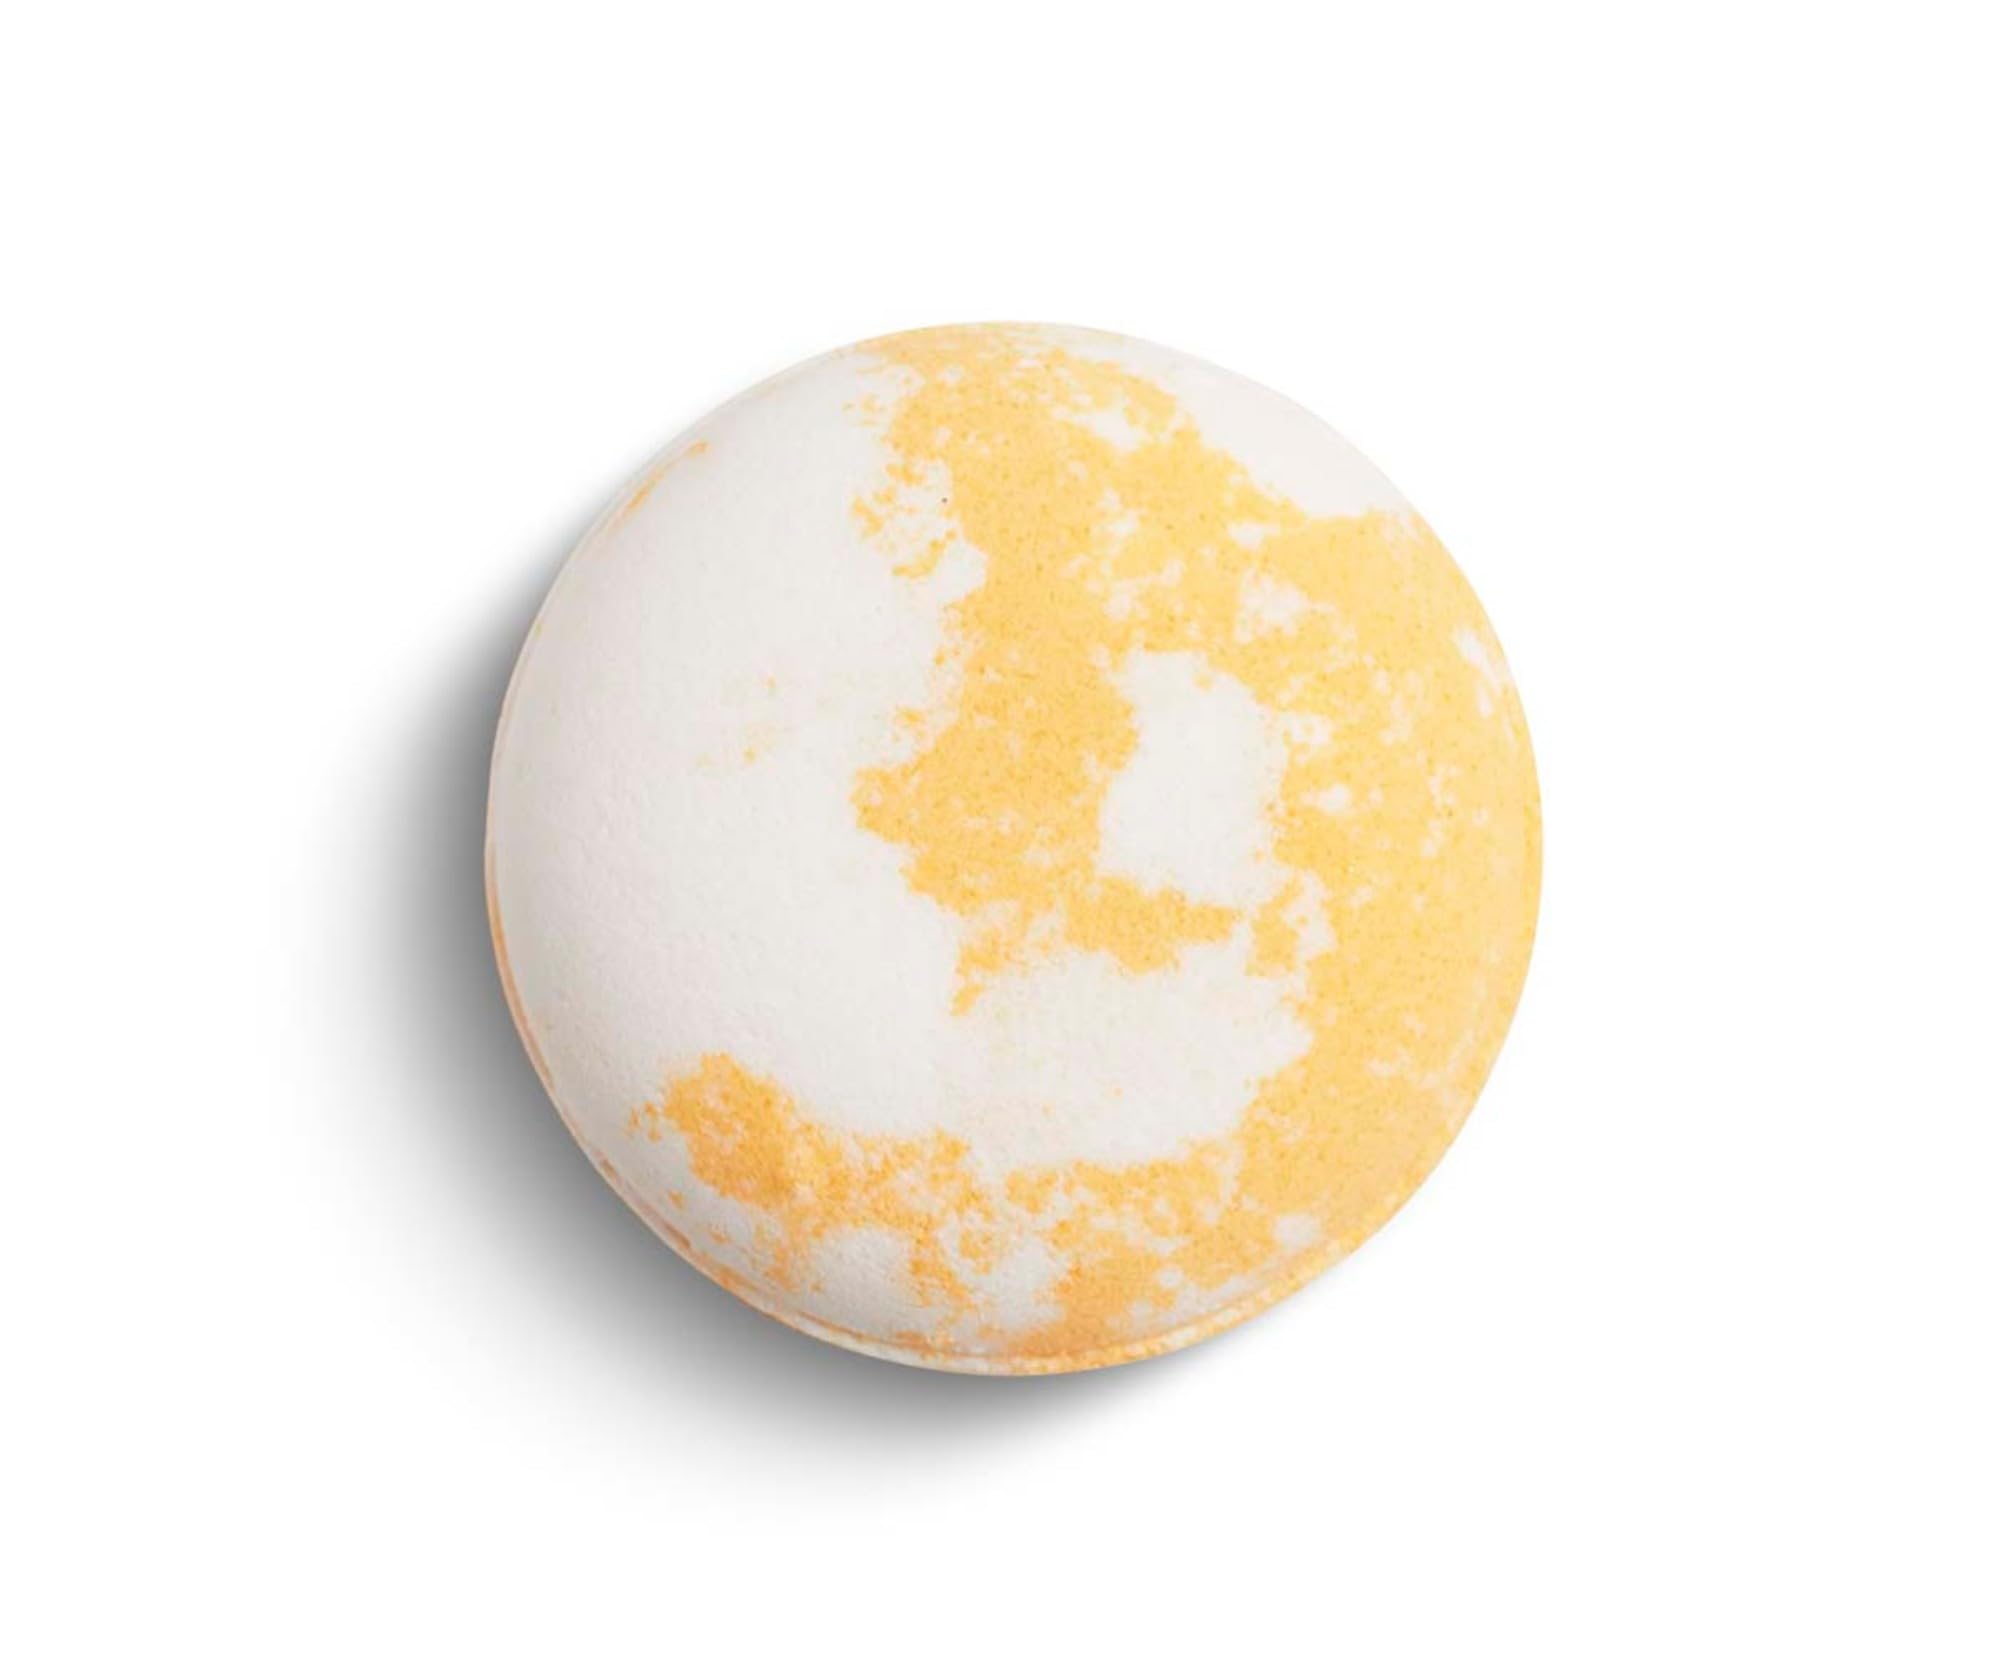 Sprig by Kohler Bergamot + Lemongrass Bath Bomb, Hypoallergenic, Made with Natural Botanicals & Premium Skincare Ingredients (Shea Butter, Coconut Oil, & Kaolin Clay) to Uplift and Energize - Recharge